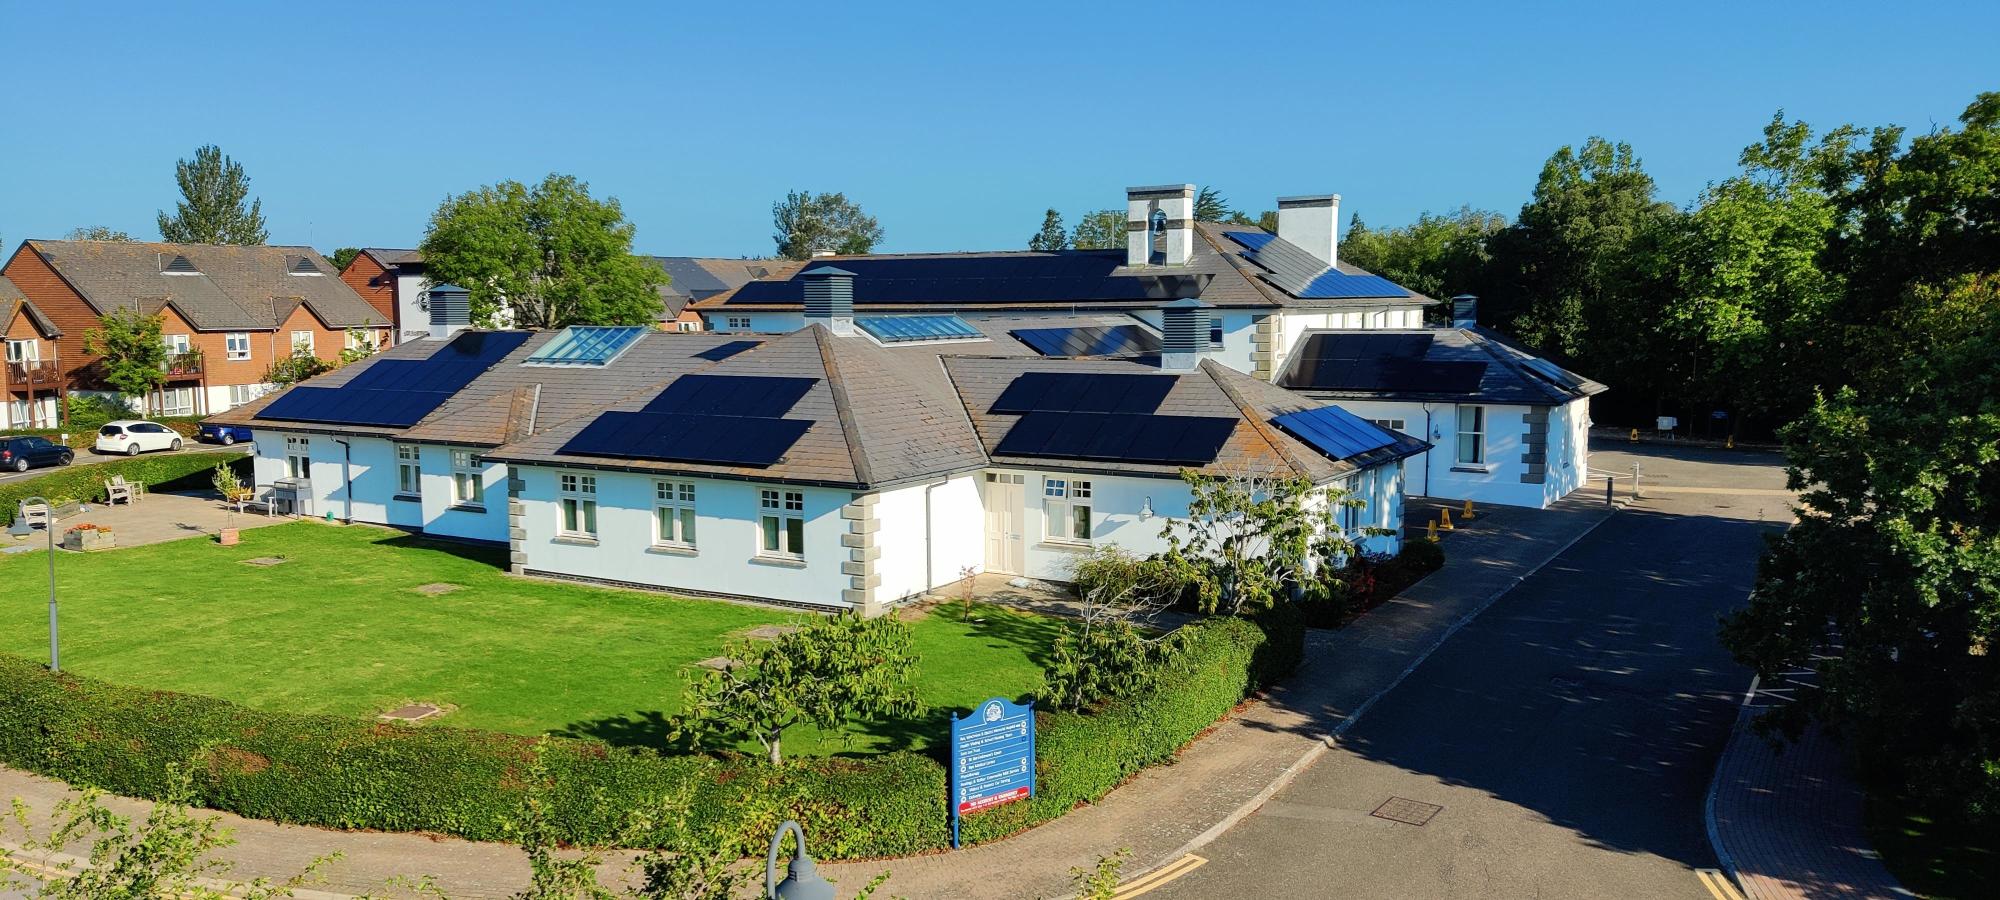 Community Hospital Becomes UK’s First to Achieve Carbon Neutrality